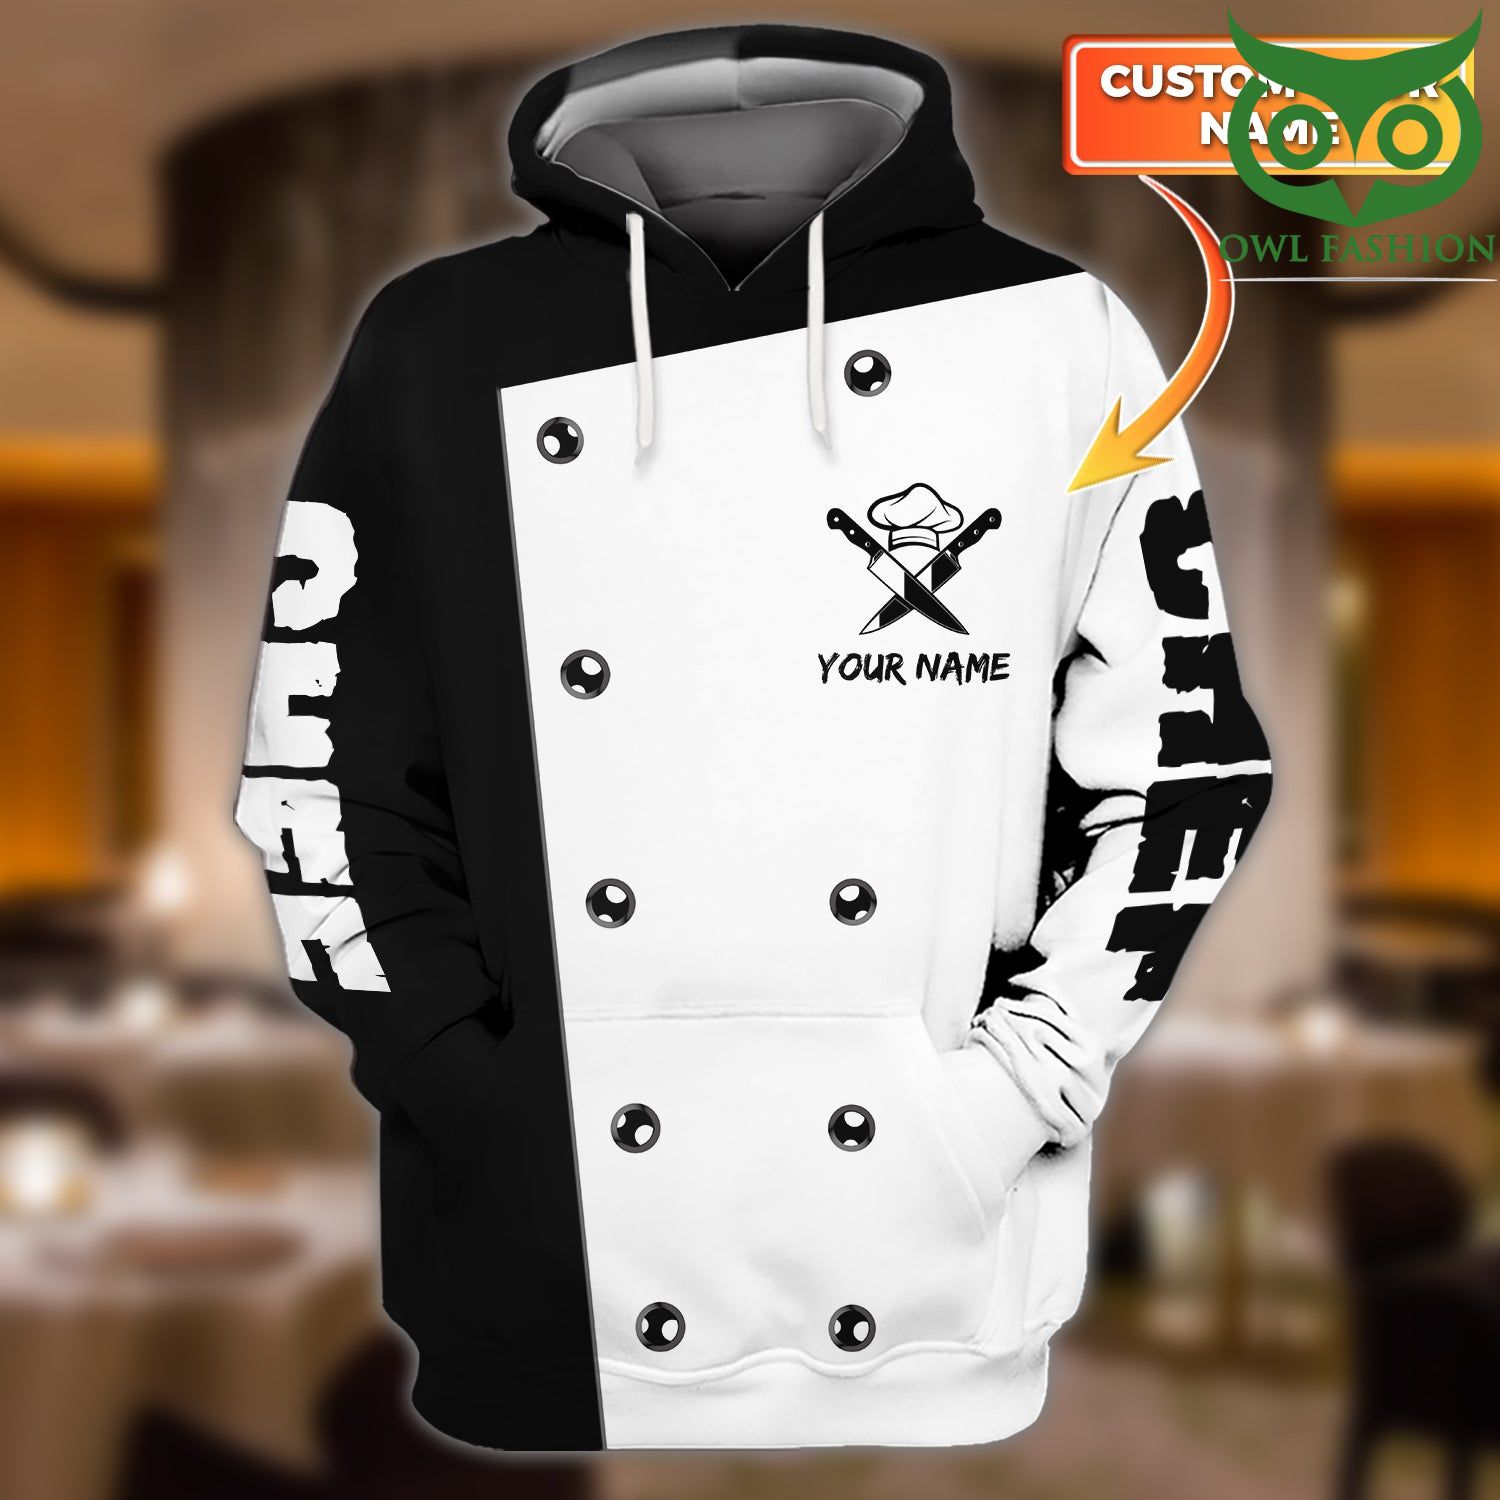 39 CHEF Costume black and white personalized 3D hoodie